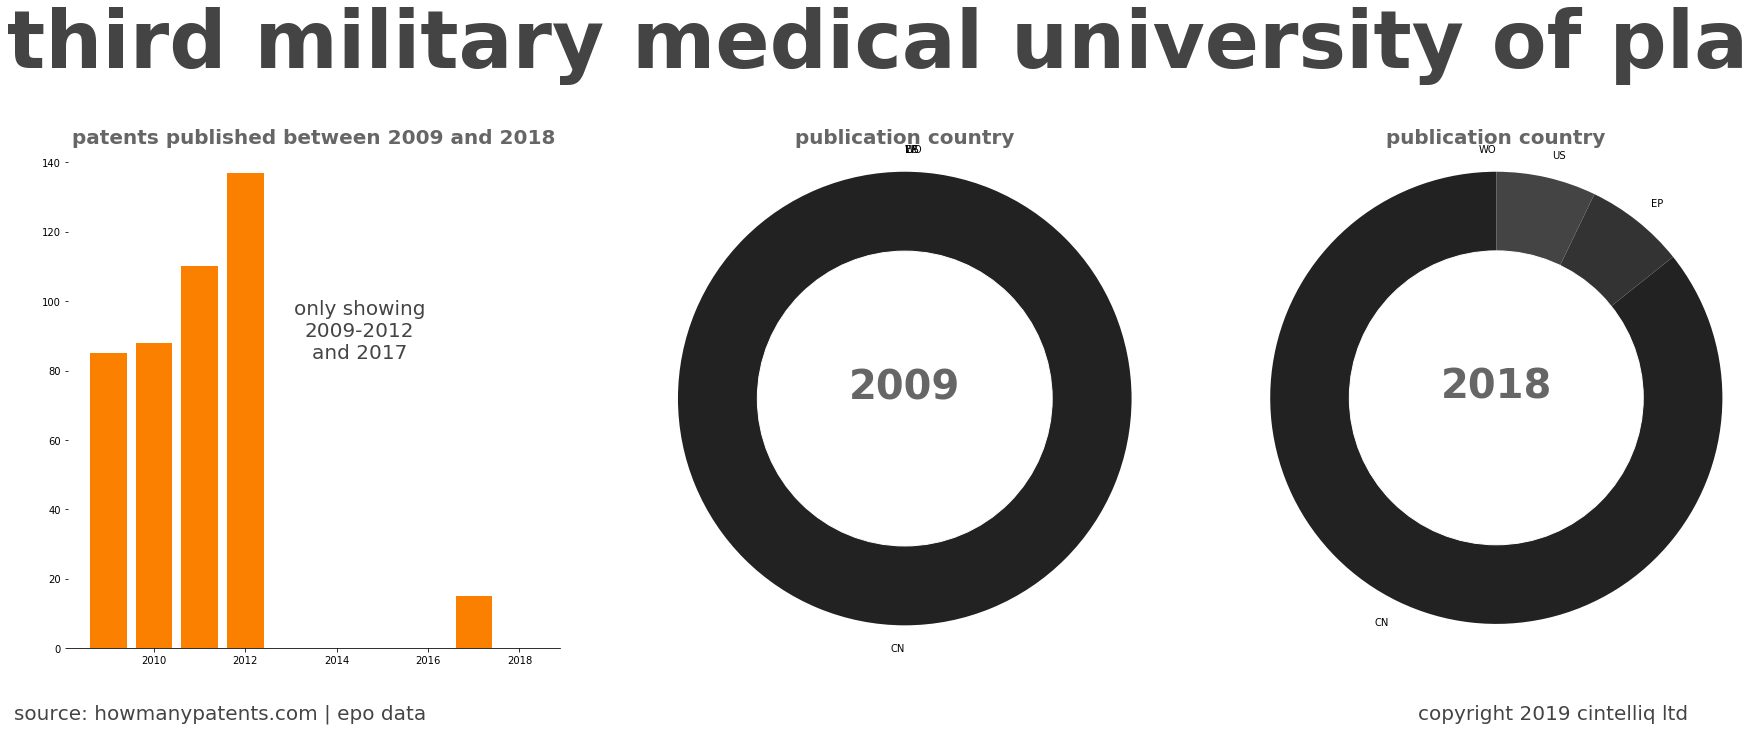 summary of patents for Third Military Medical University Of Pla